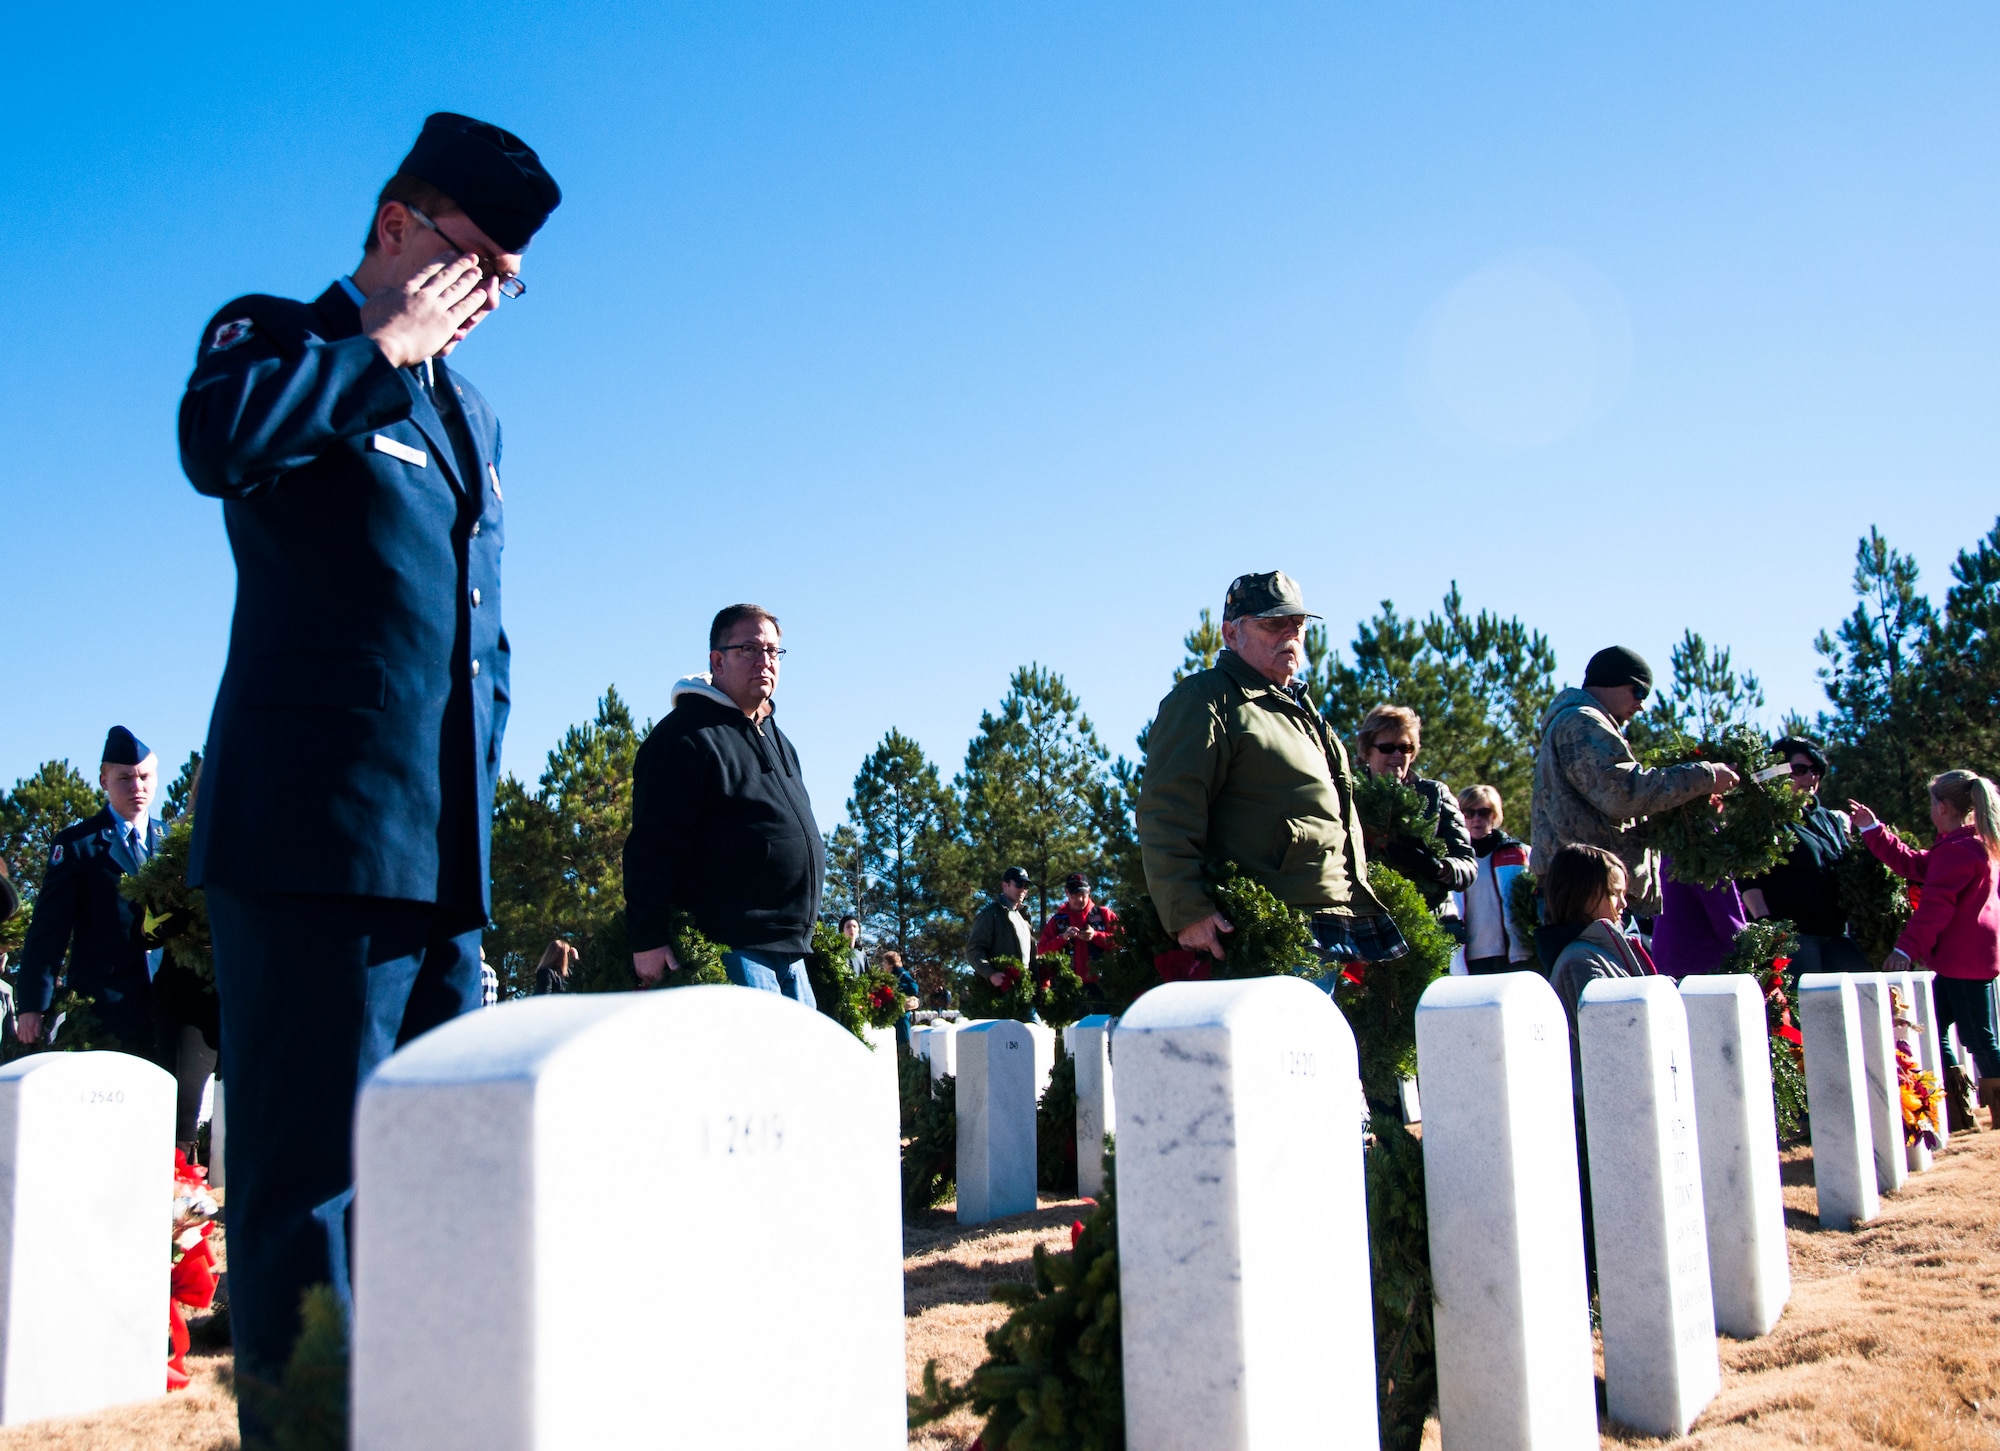 A volunteer salutes a gravestone after laying his wreath at the Wreaths Across America ceremony in Canton, Ga. at Georgia National Cemetery Dec. 13, 2014. Thousands showed up to GNC to honor America’s heroes. (U.S. Air Force photo/Senior Airman Daniel Phelps))